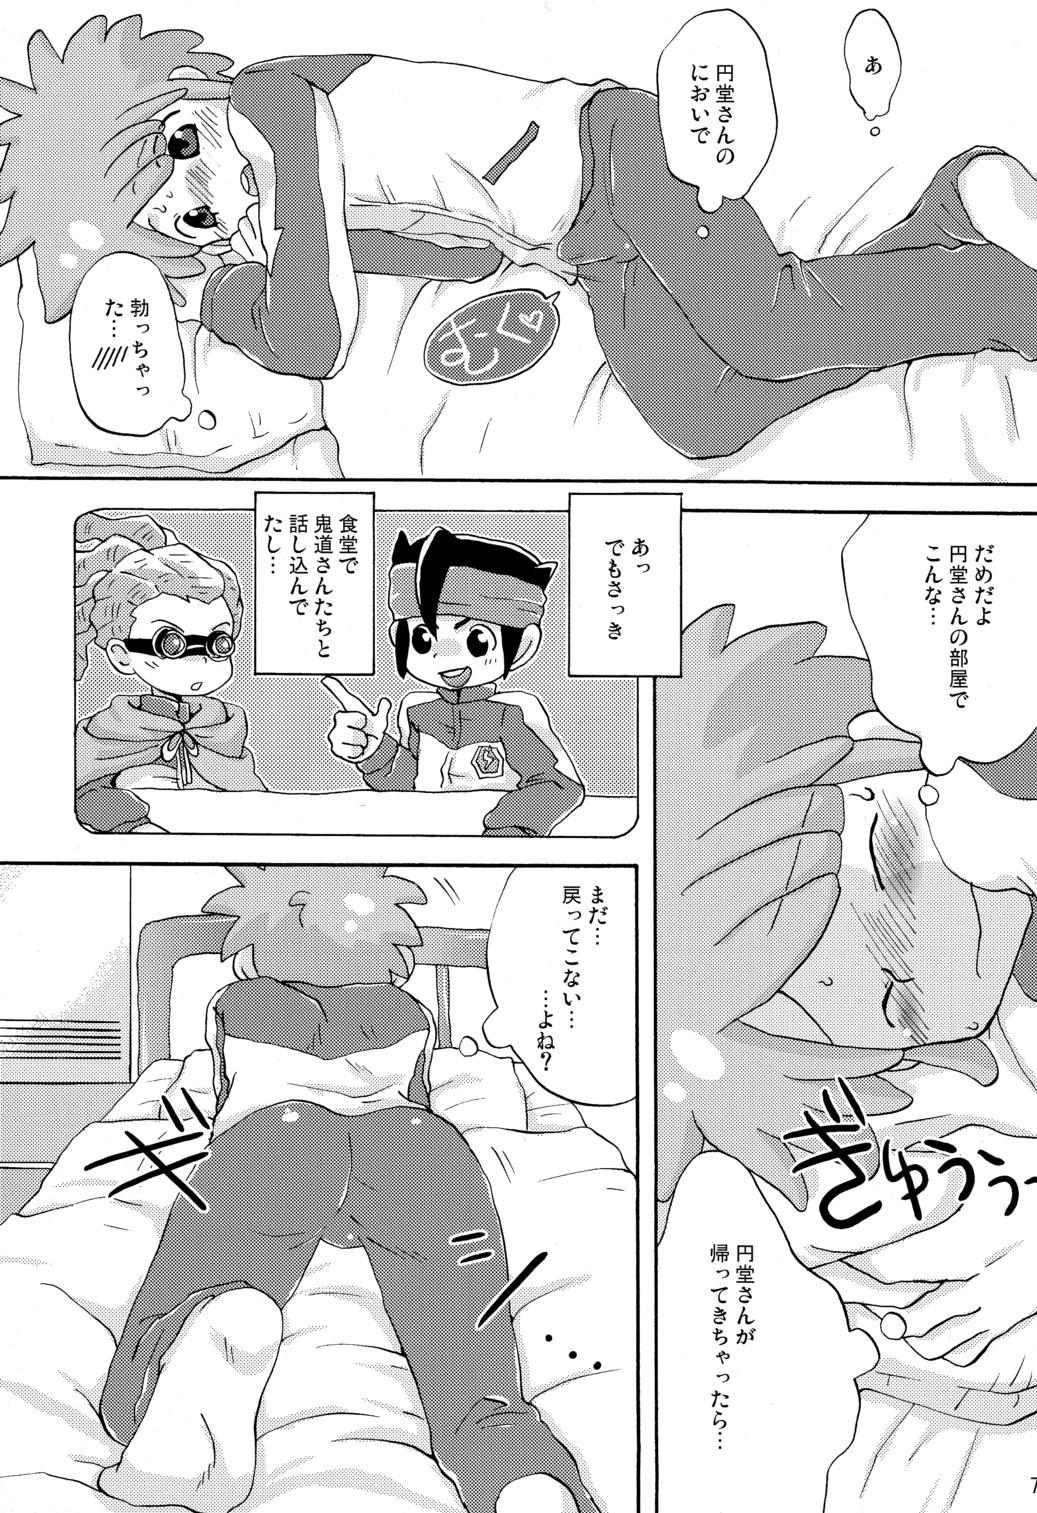 Dirty SWEET ROOM - Inazuma eleven Cowgirl - Page 7